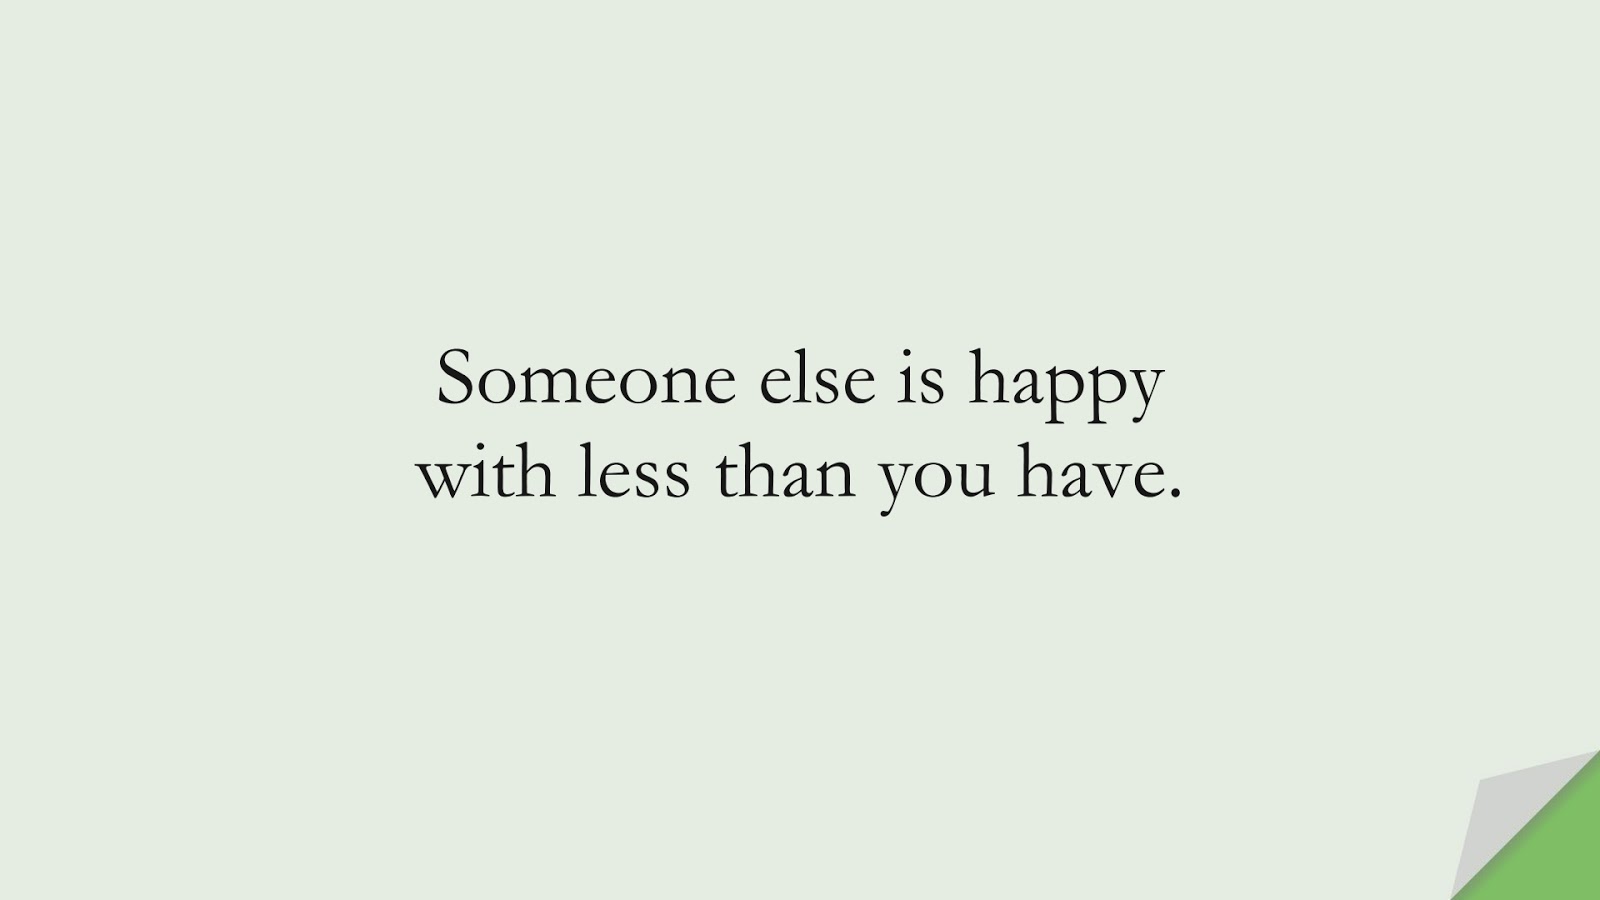 Someone else is happy with less than you have.FALSE